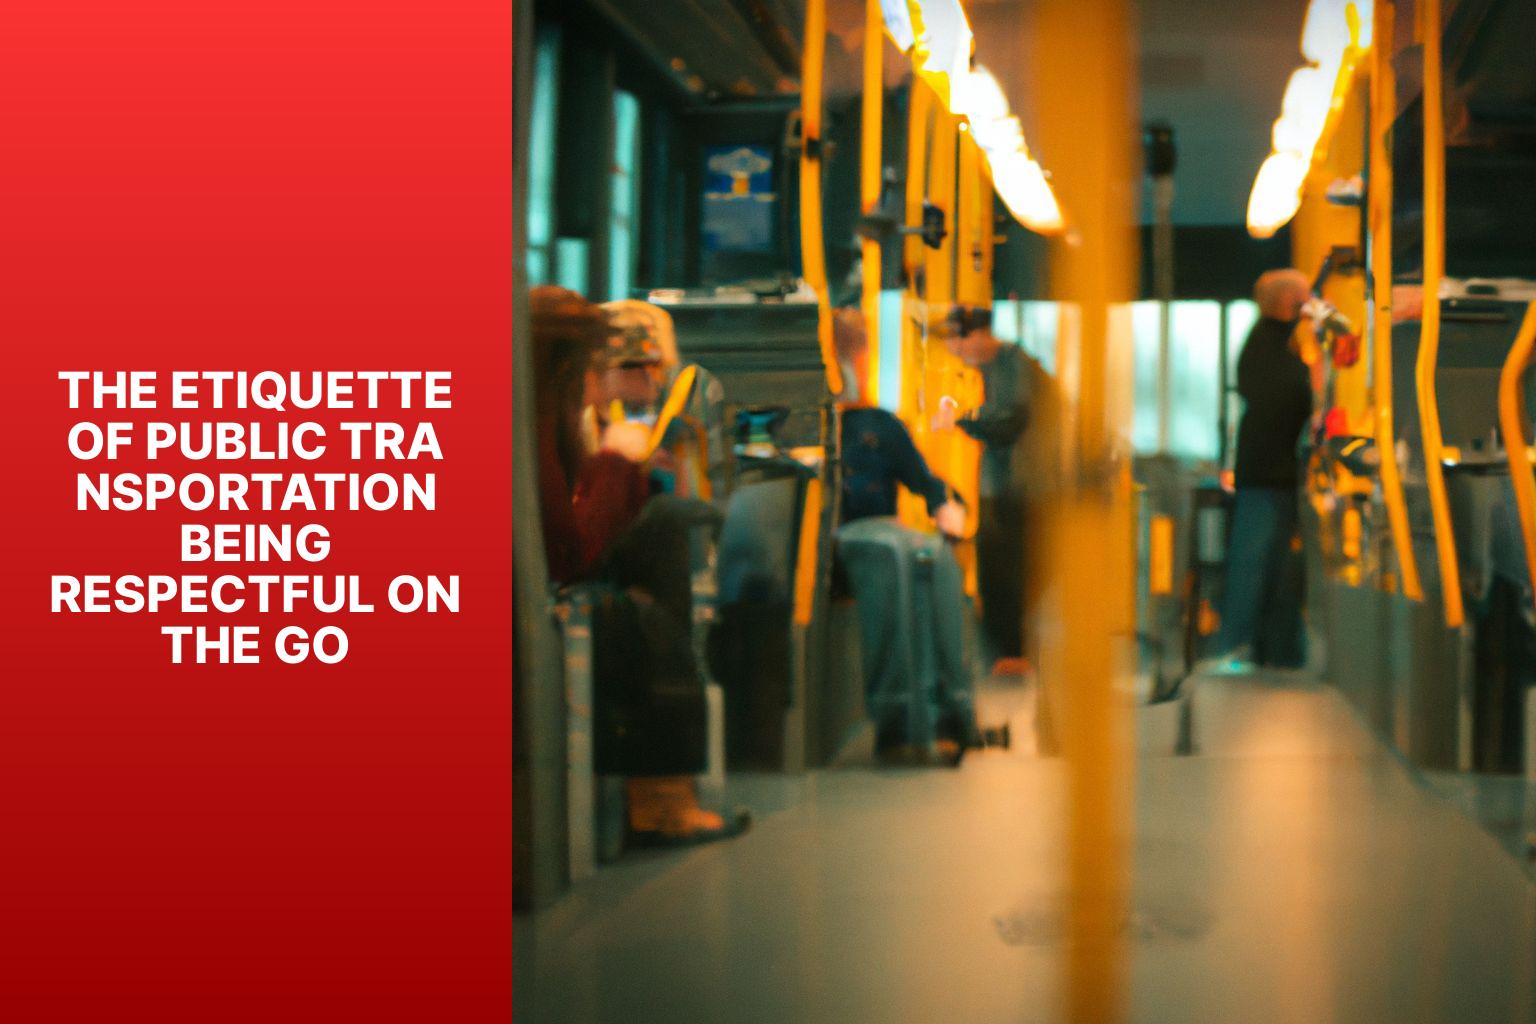 The Etiquette of Public Transportation: Being Respectful on the Go